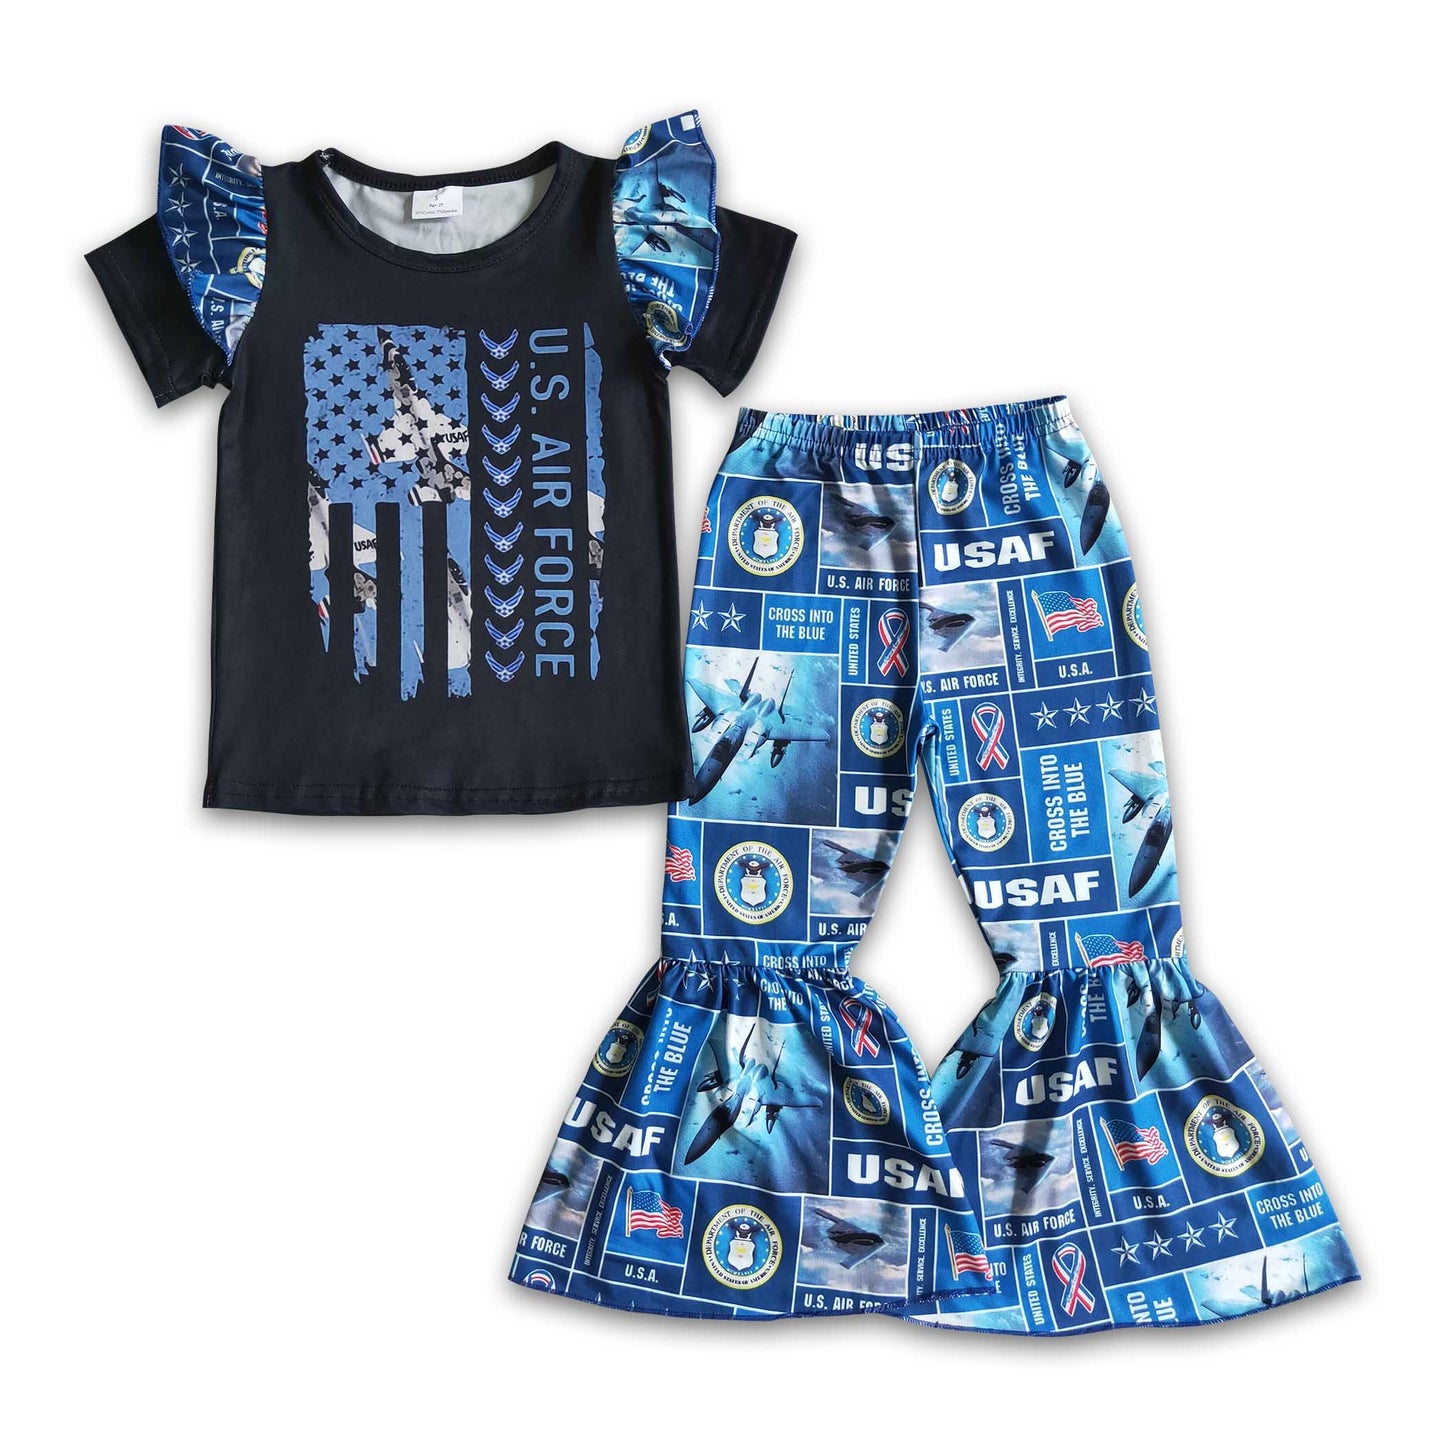 Cross into the blue flag airplain girls clothing set